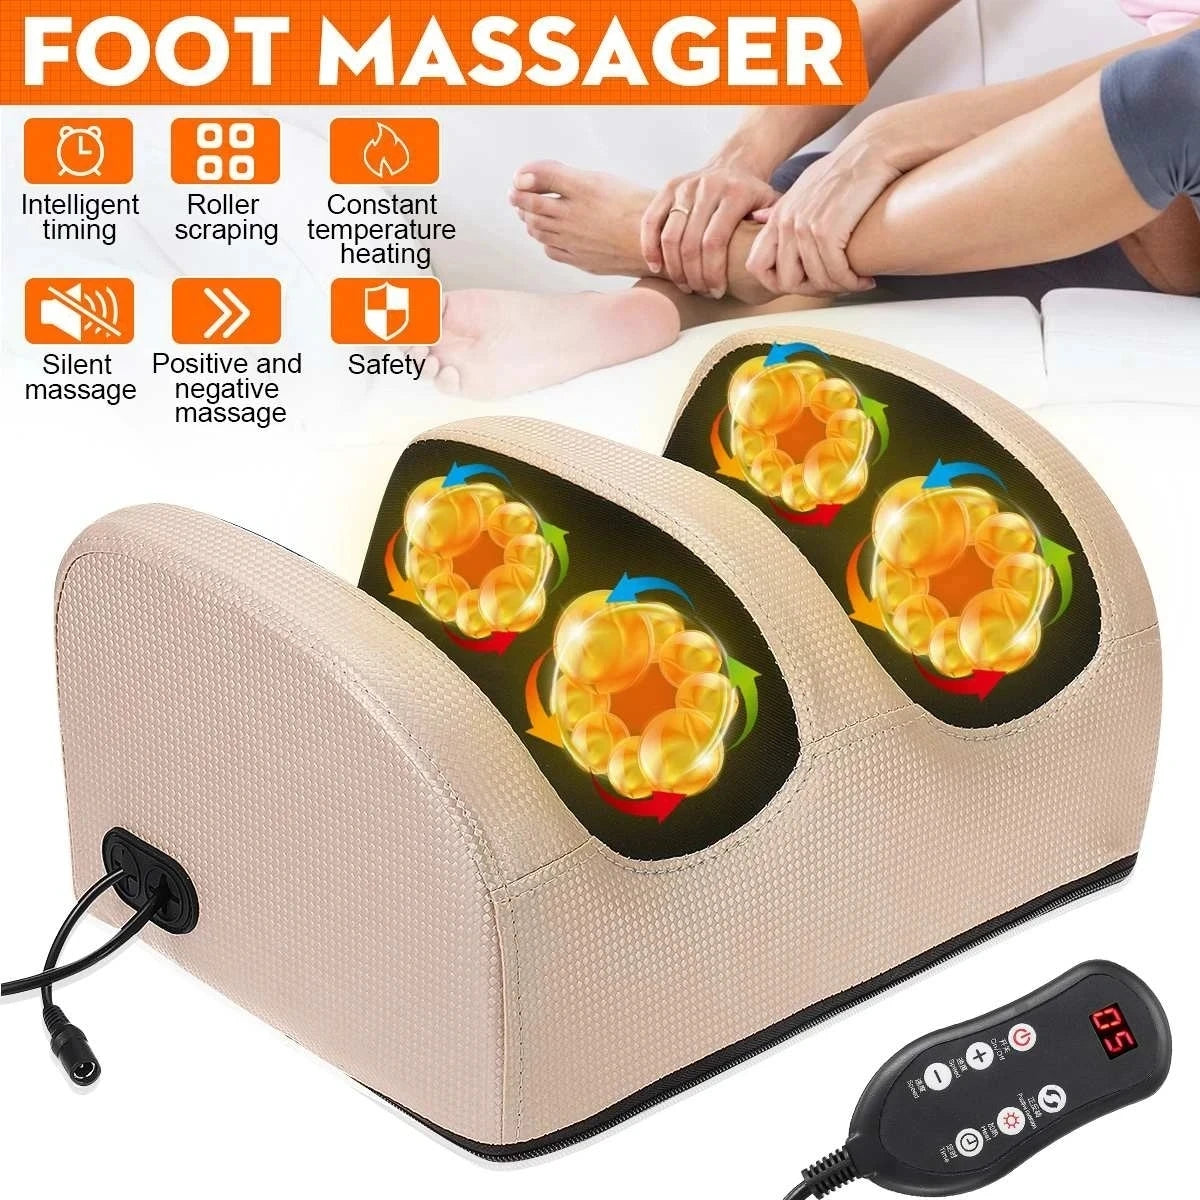 Electric Foot Leg Massager Shiatsu Therapy Calf Relaxation Health Care Infrared Heating Kneading Roller Deep Relieve Foot Pain - naiveniche